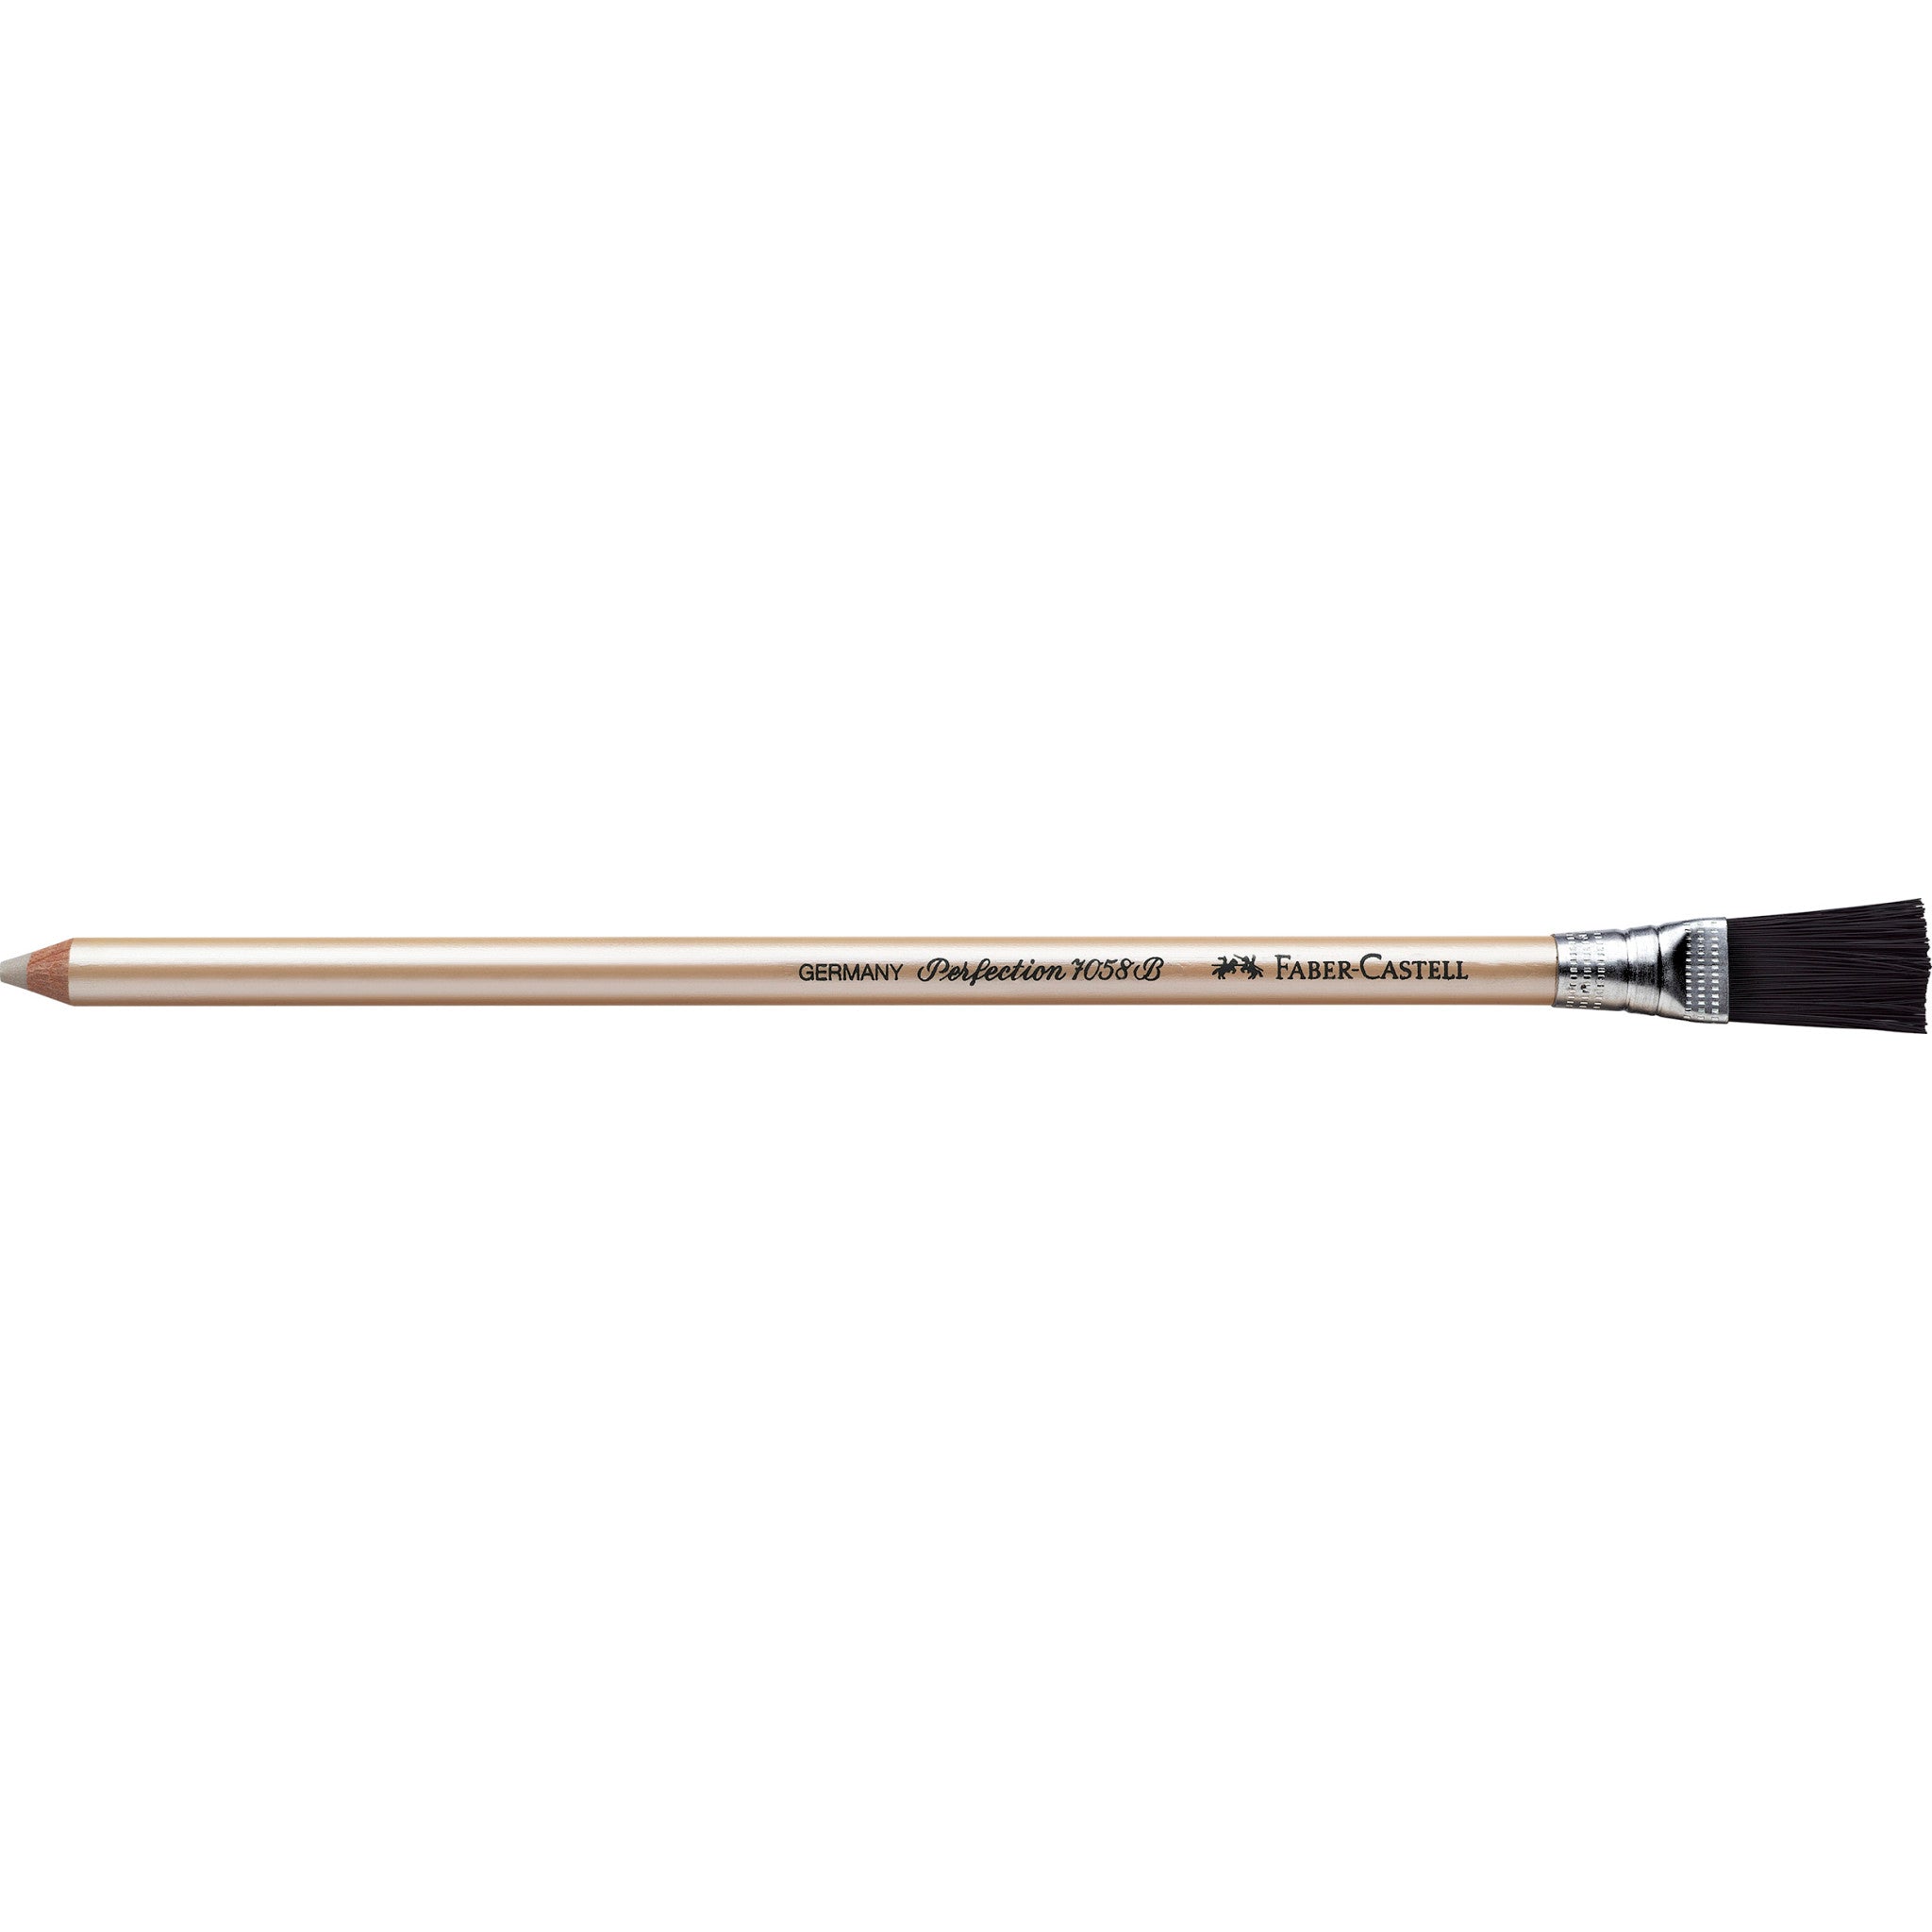 Perfection 7058 Eraser Pencil with Brush - #185800 – Faber-Castell USA